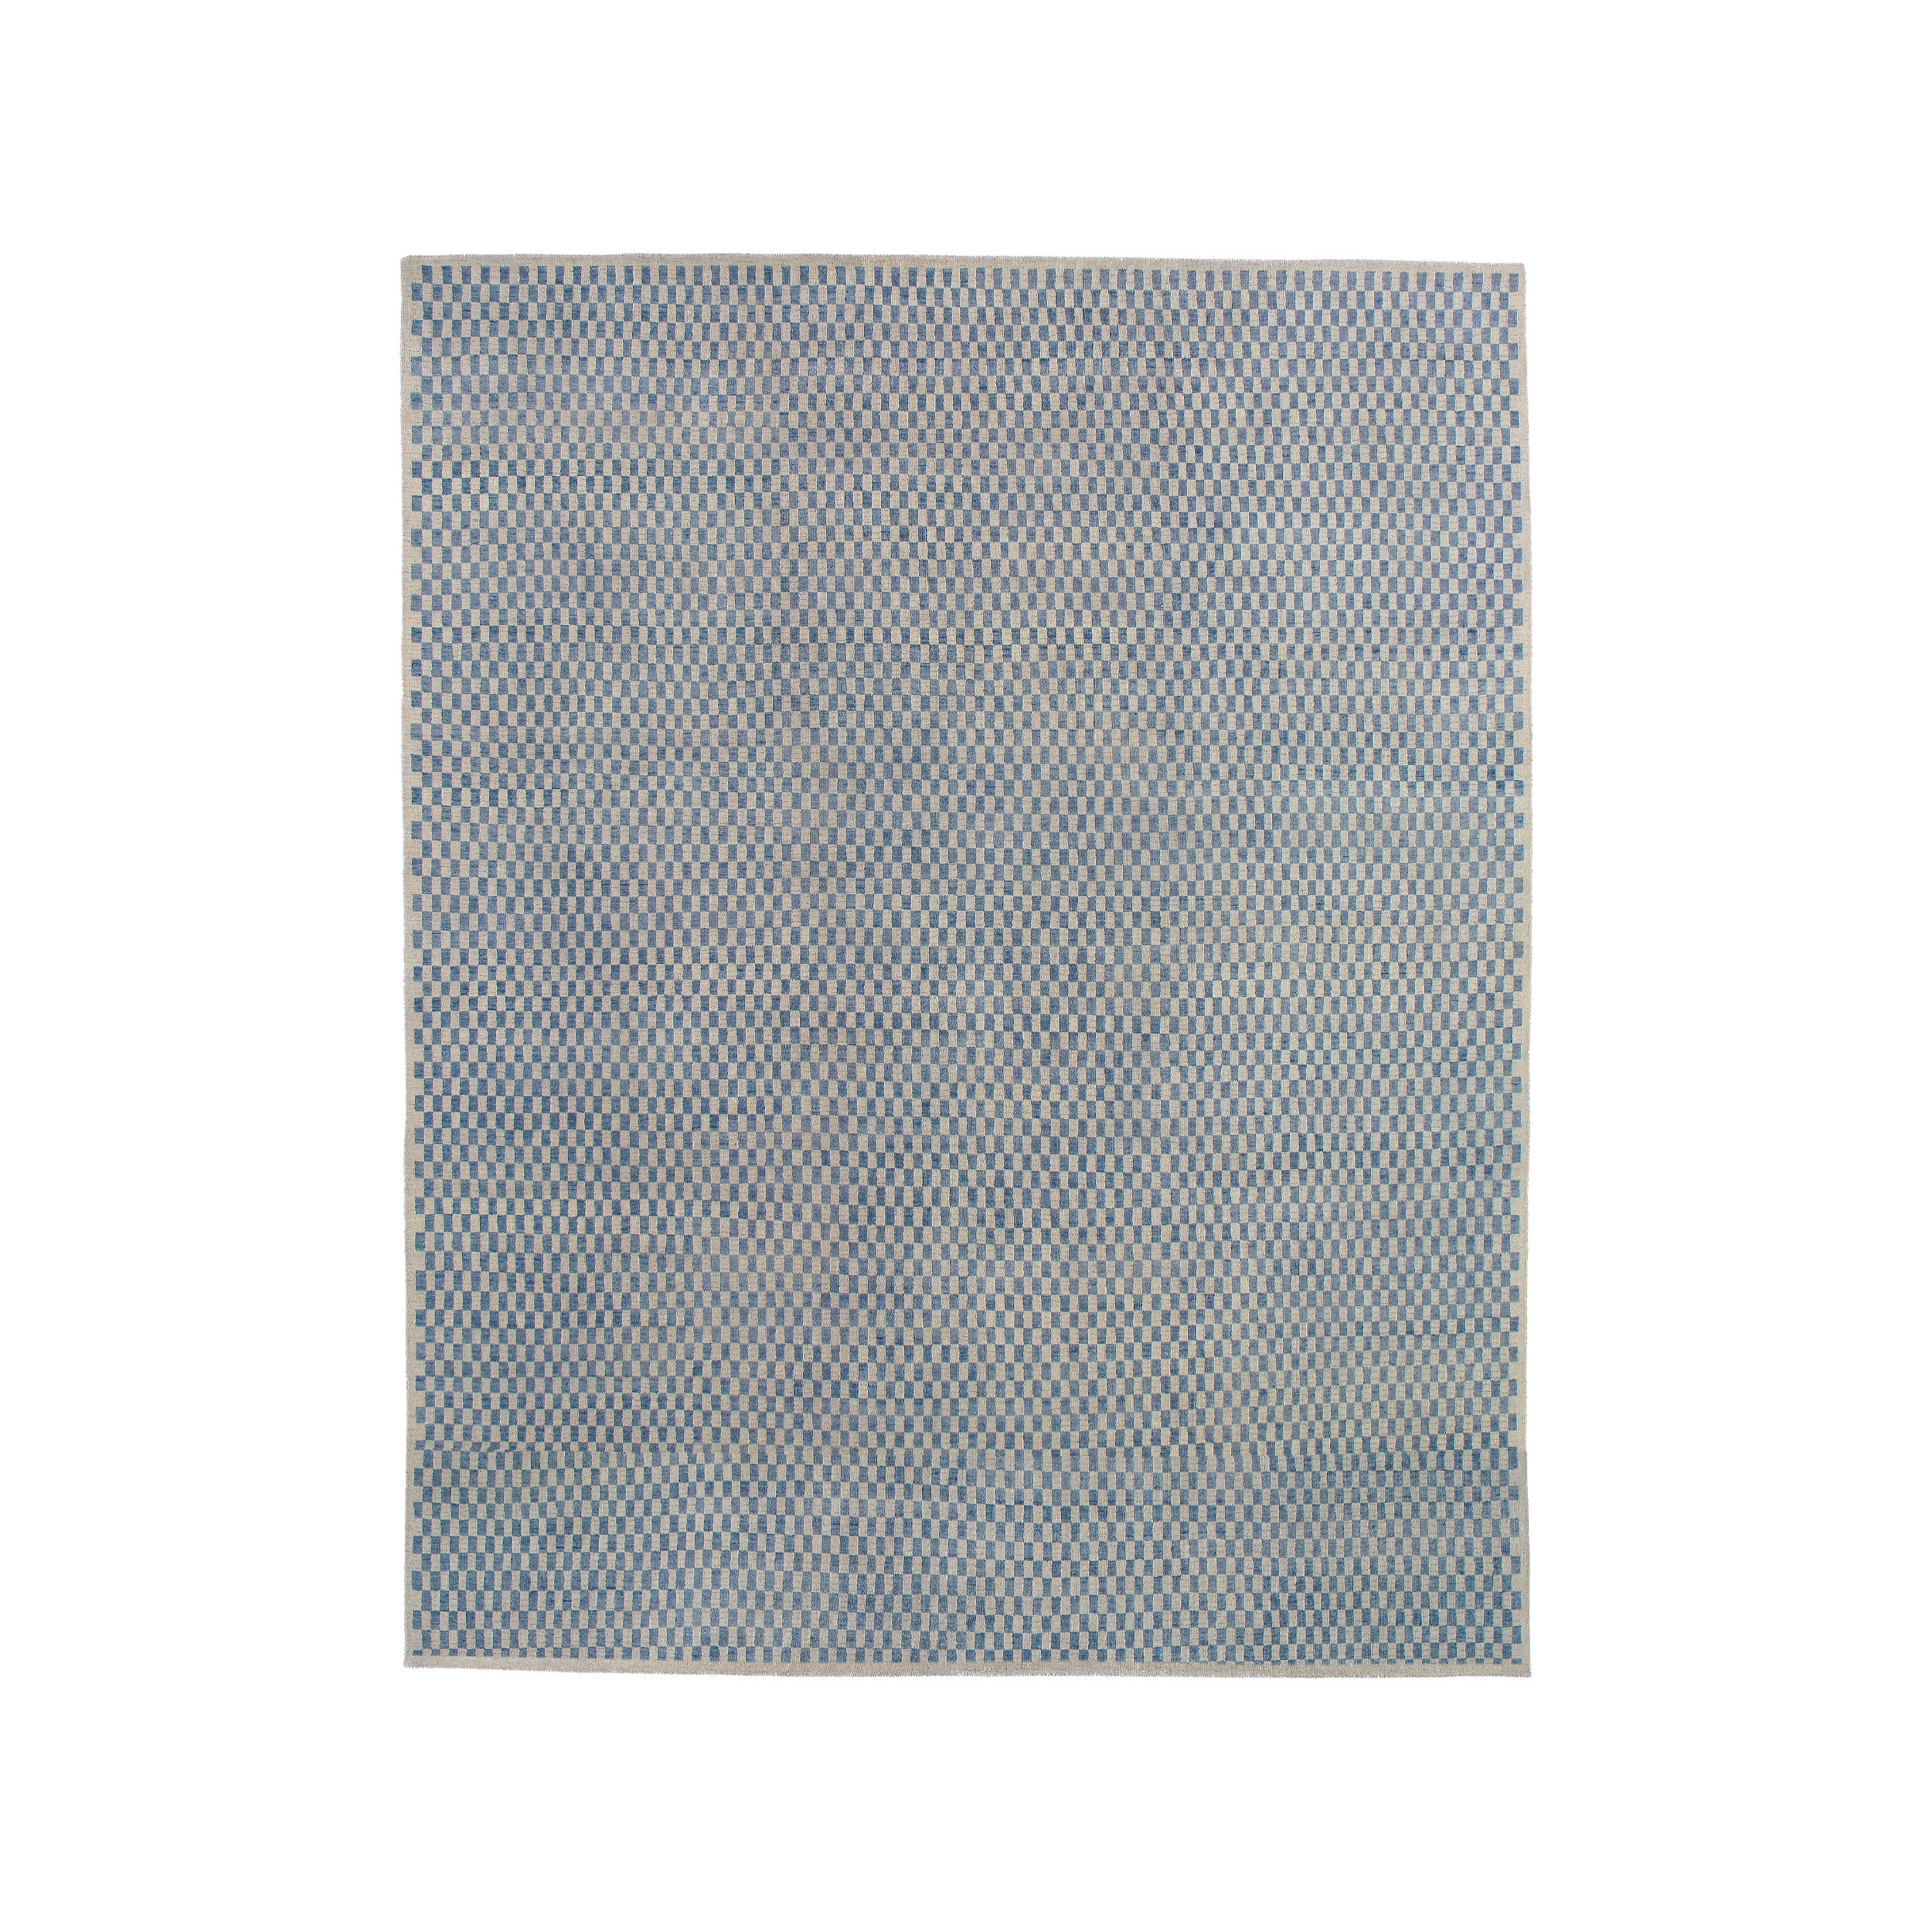 This Checkered flatweave rug this hand-knotted and made from the finest handspun undyed wool. 